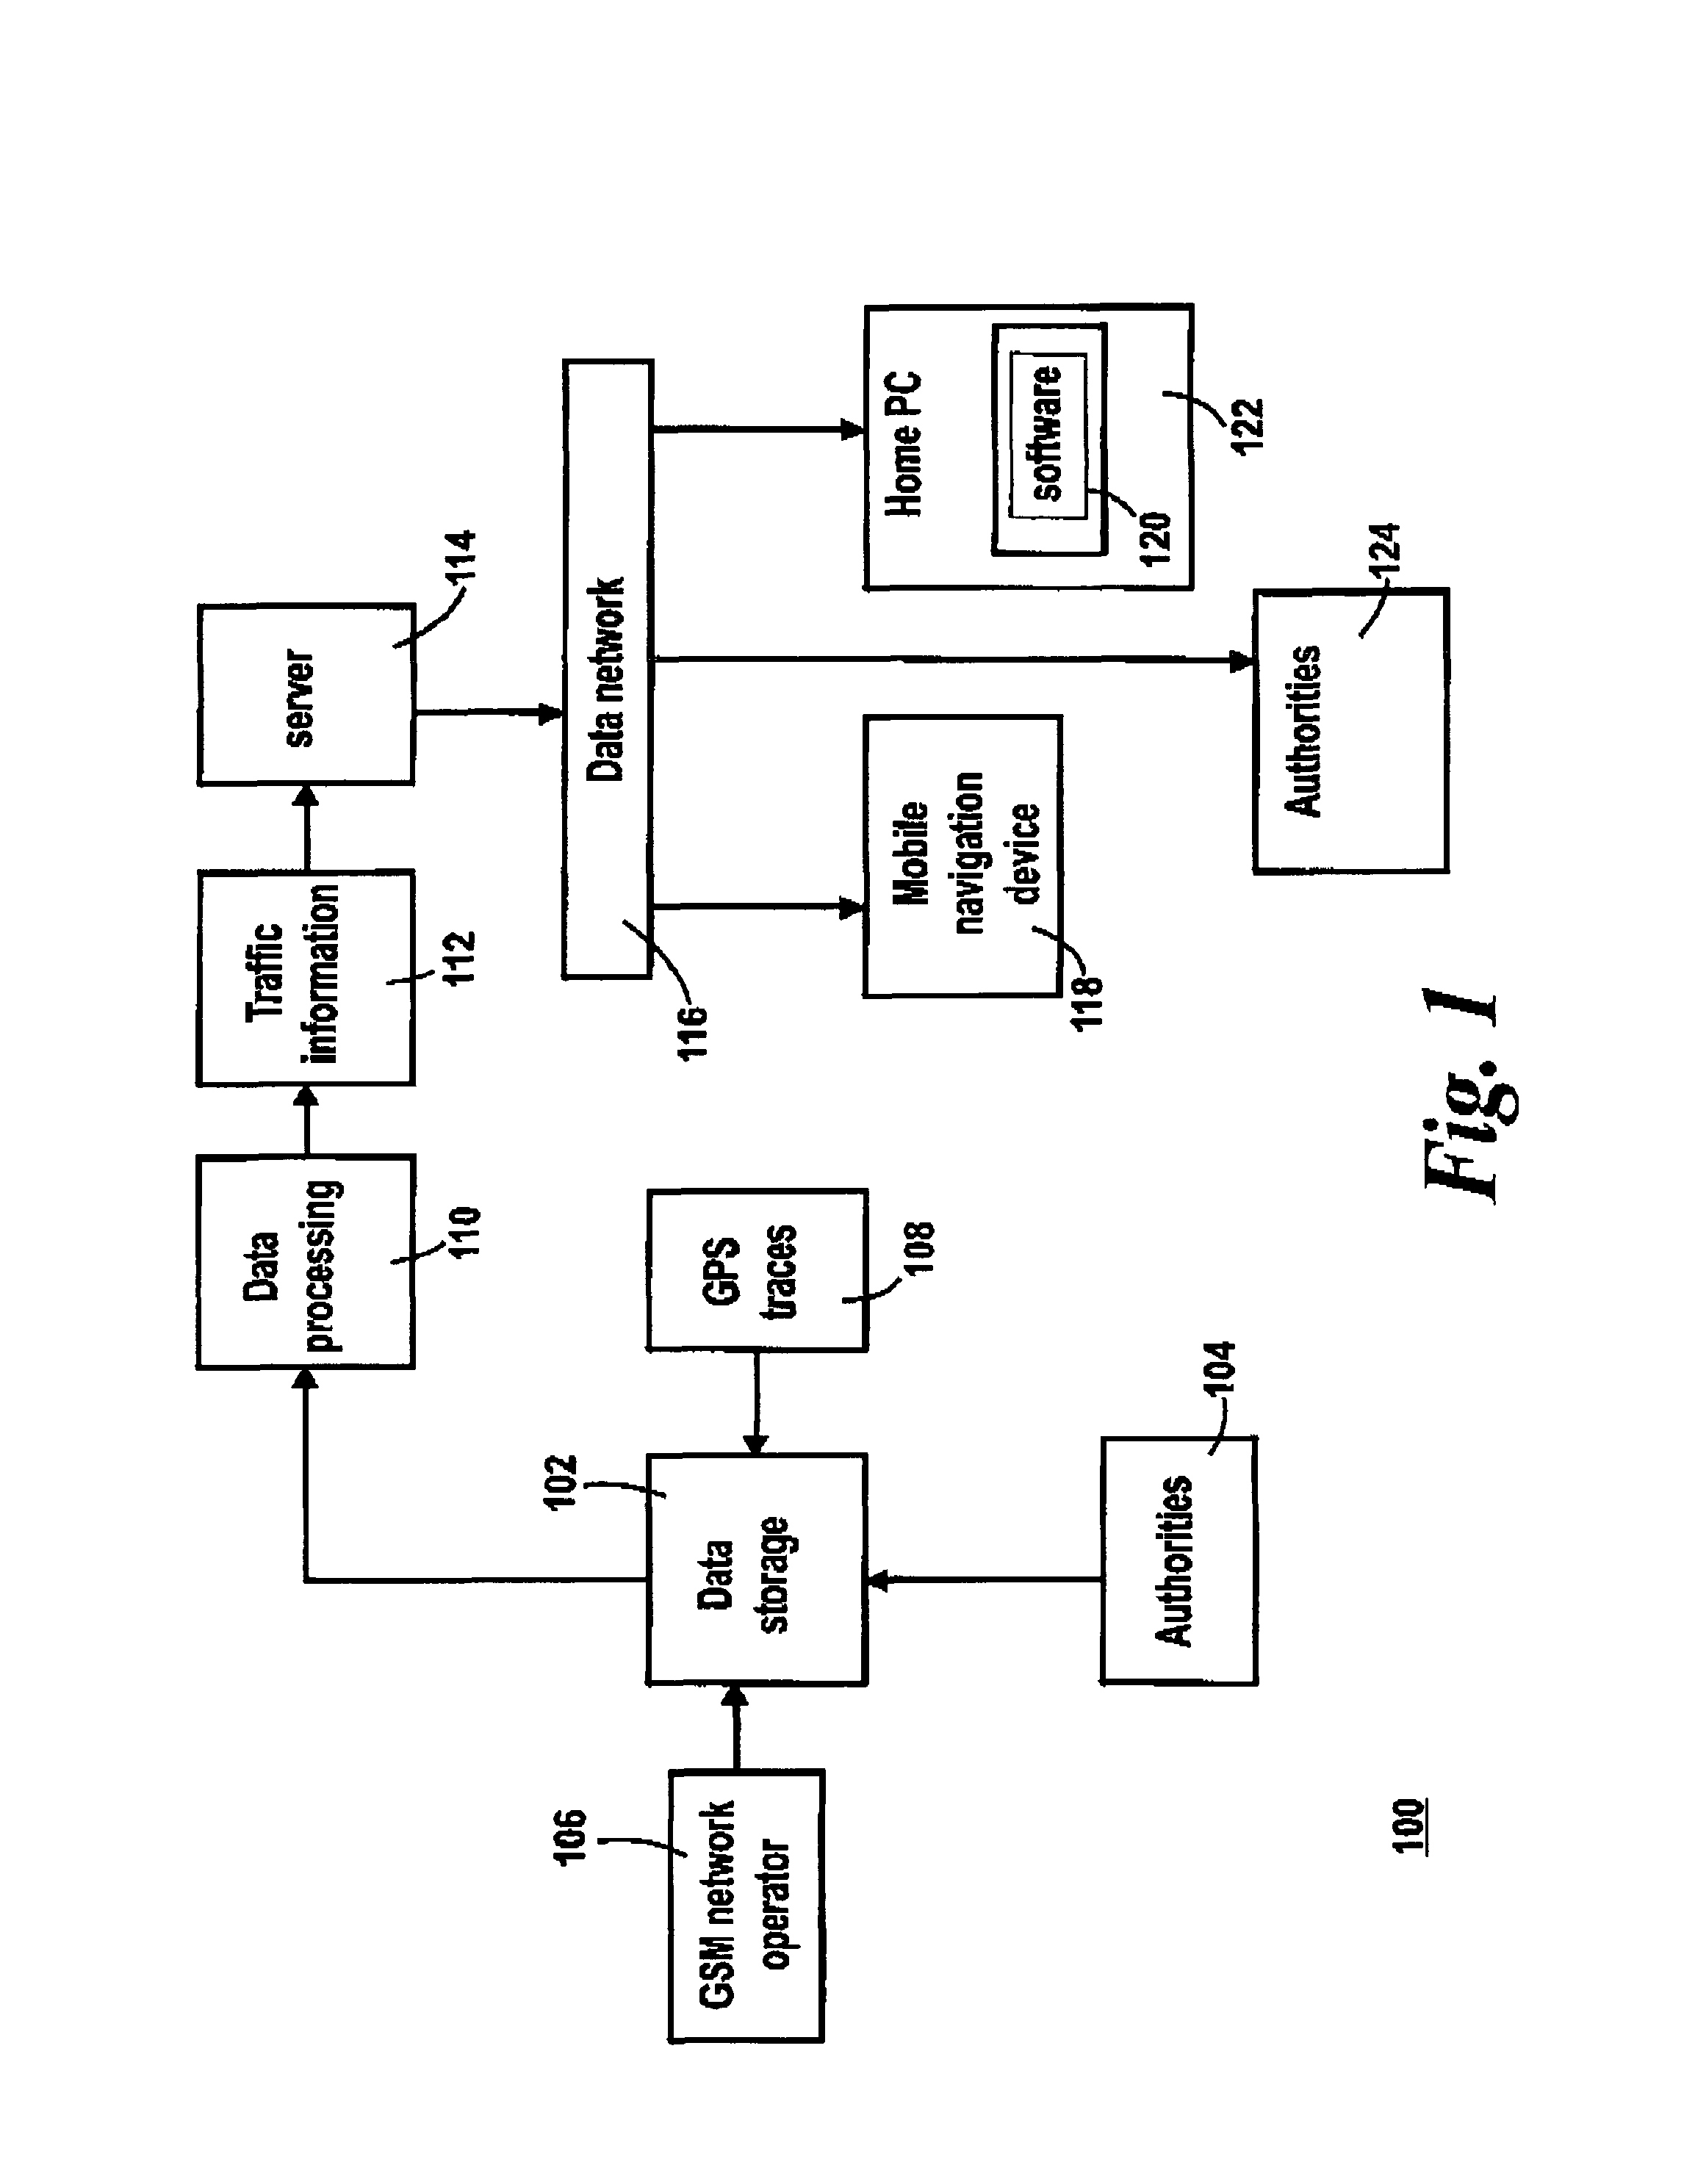 Navigation device assisting road traffic congestion management